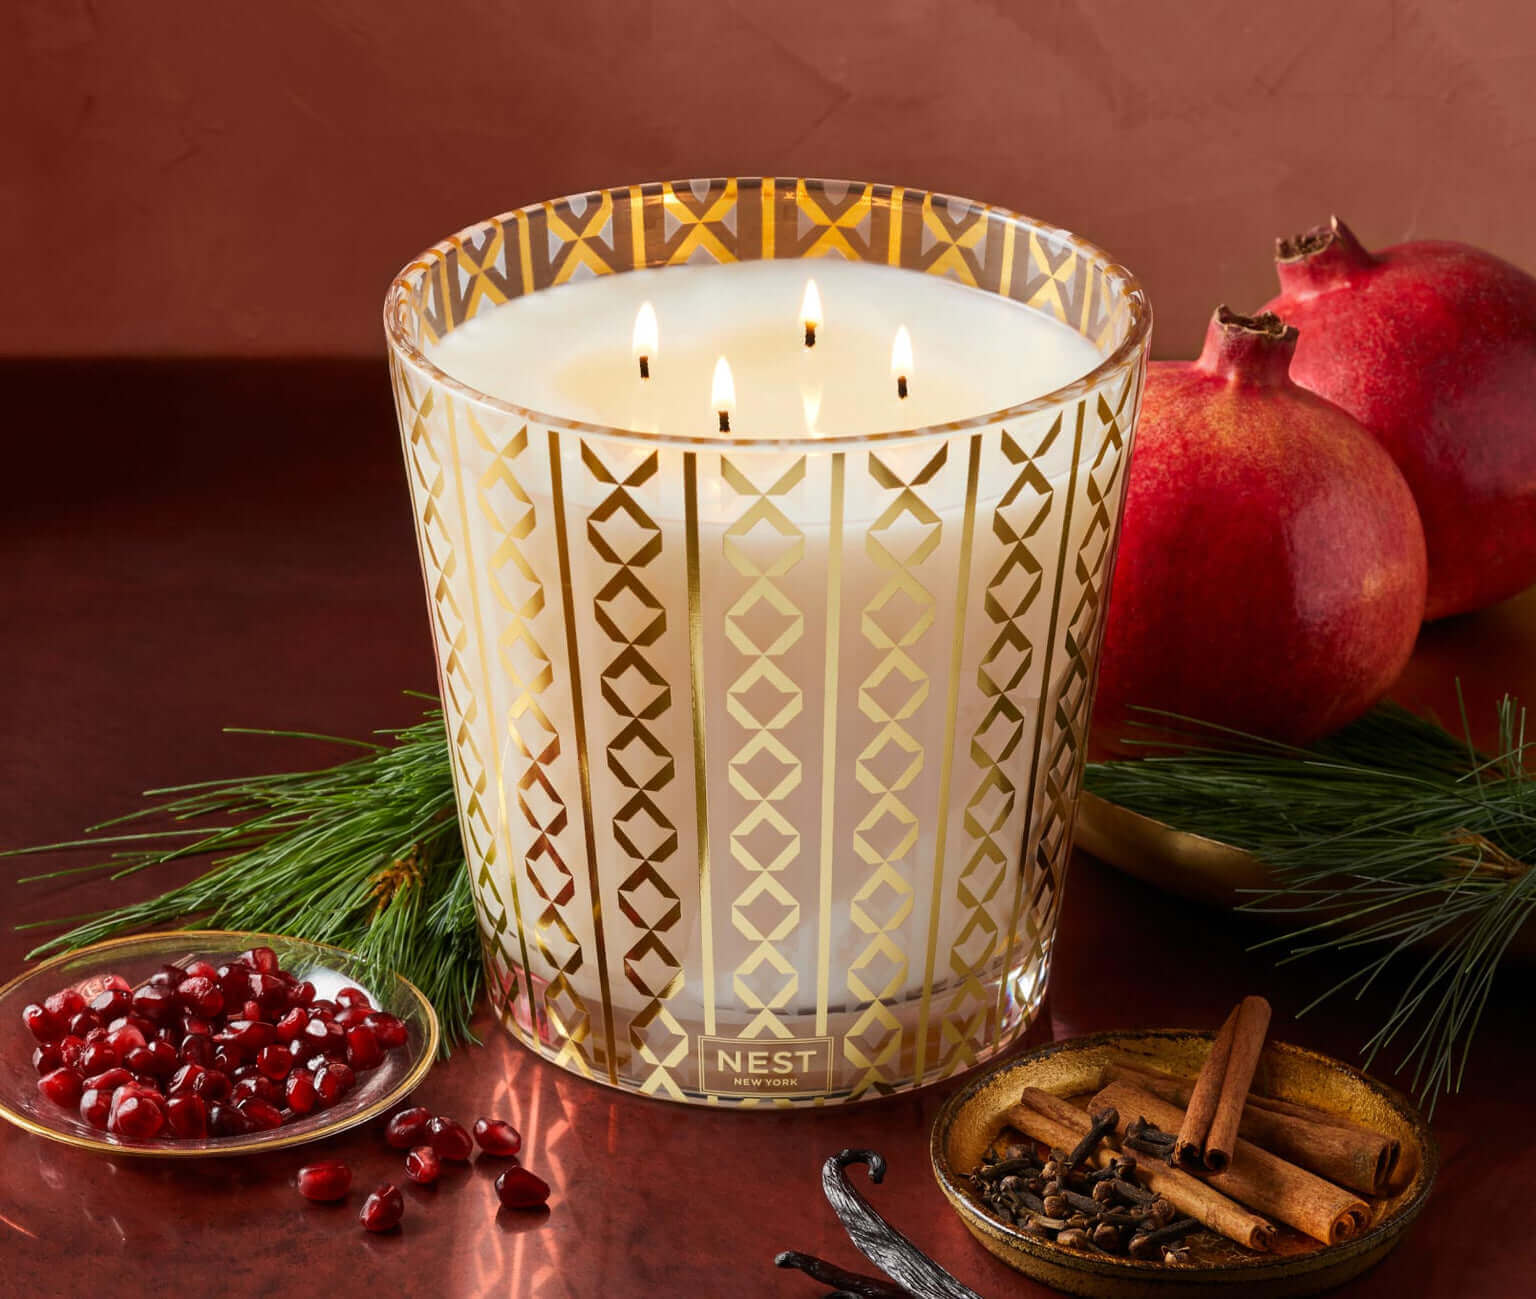 NEST New York - Holiday Candle - Tarvos Boutique